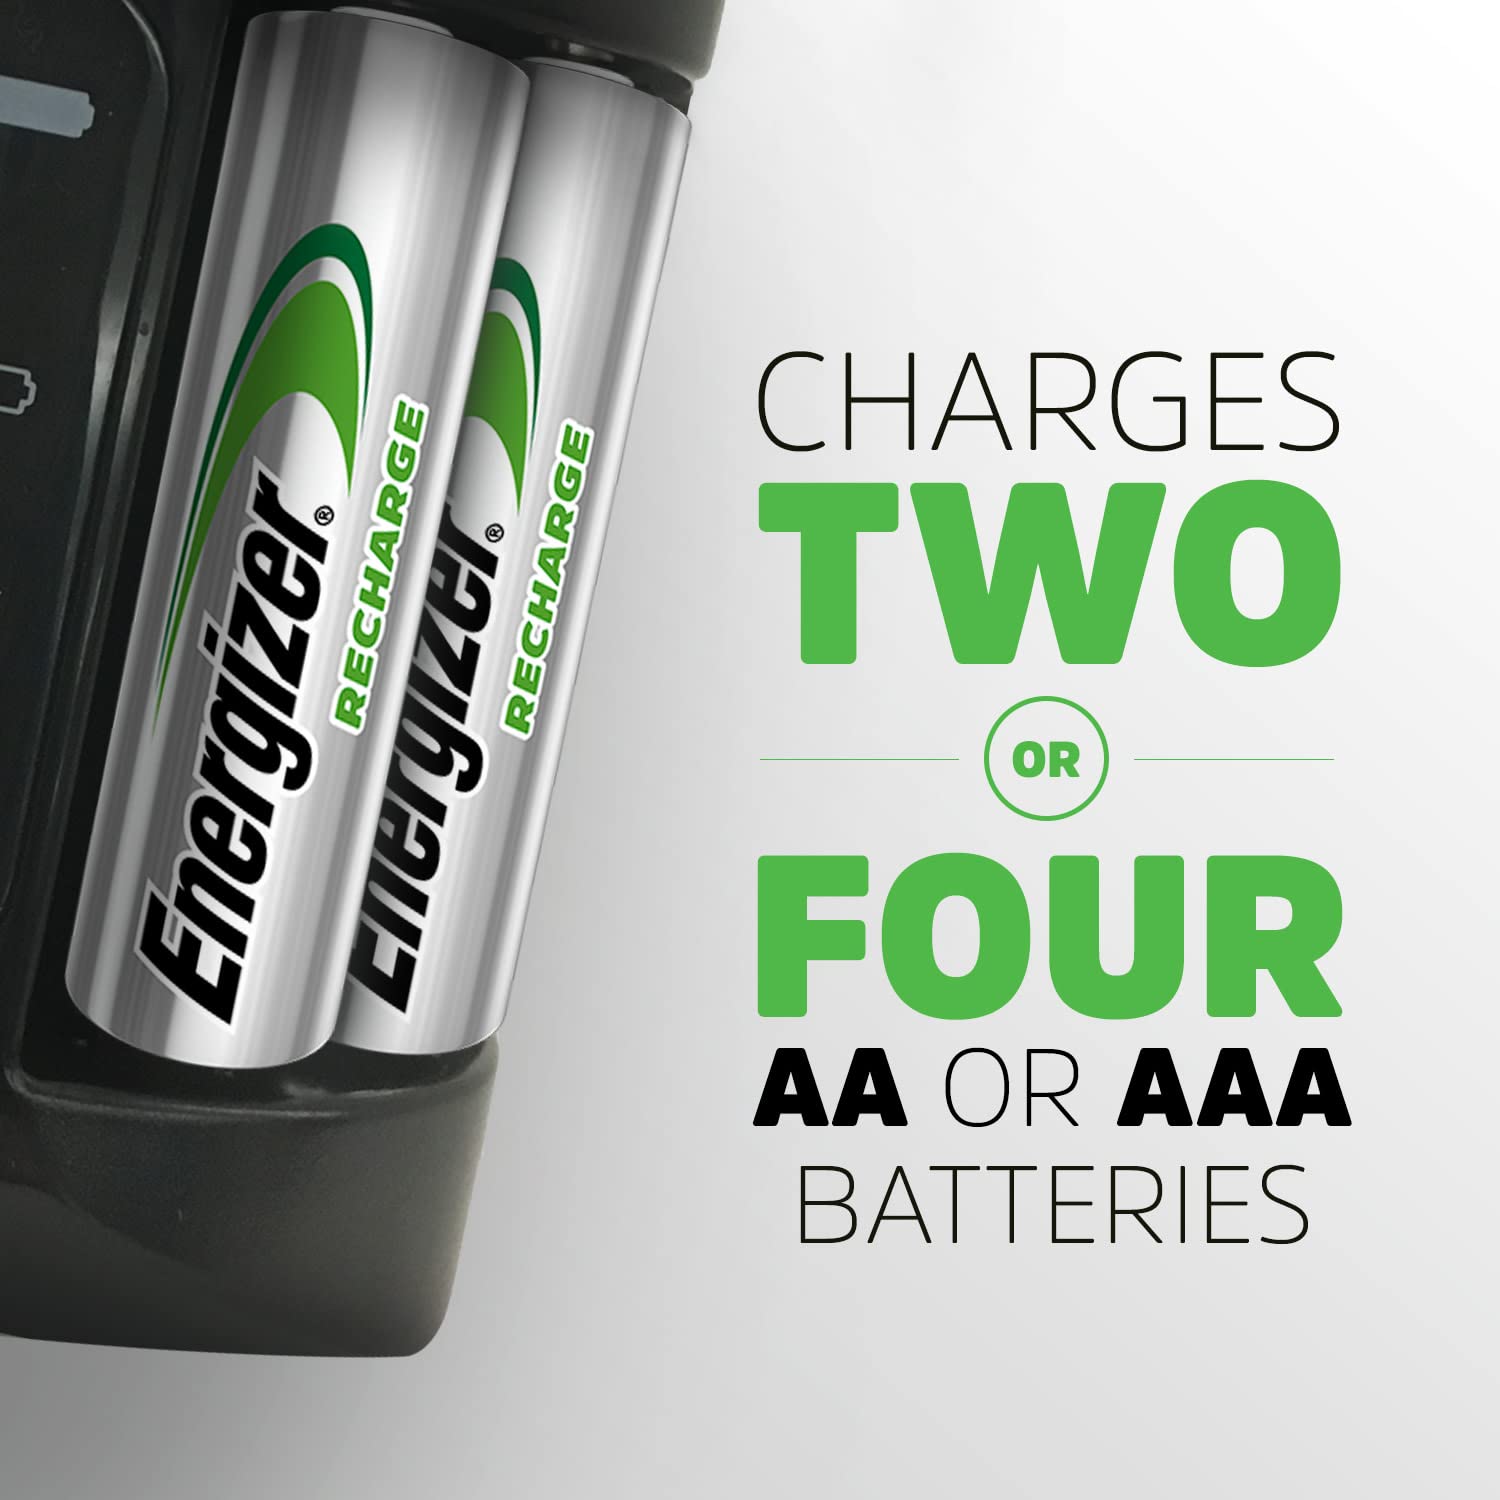 Energizer CHRPROWB4 Pro Charger With 4 AA Nimh Rechargeable Batteries